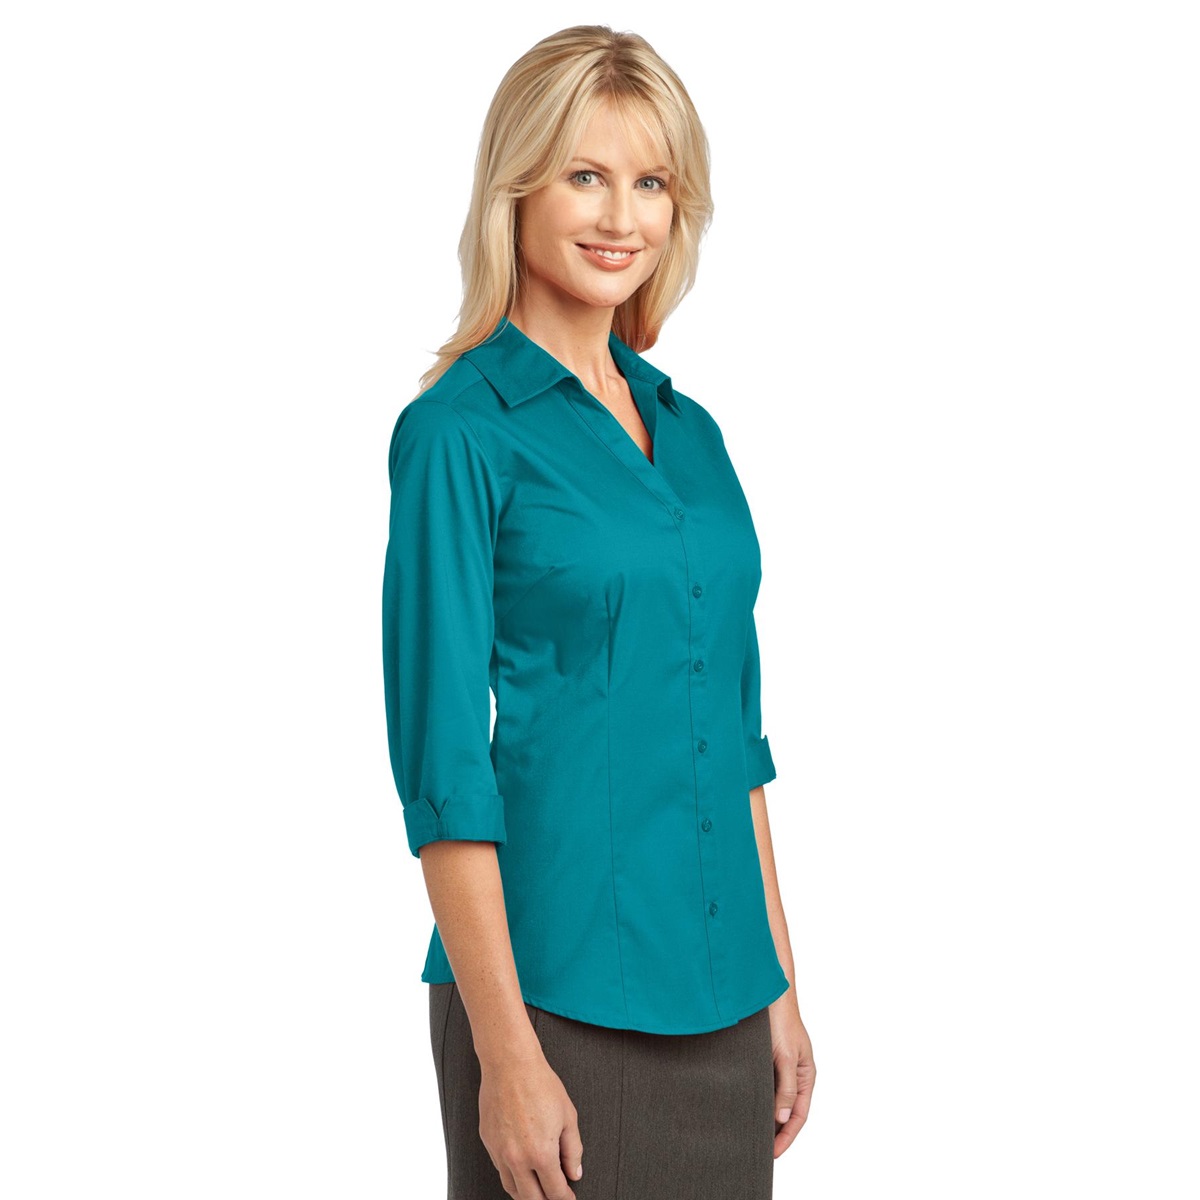 Port Authority L6290 Ladies 3/4-Sleeve Blouse - Teal Green | FullSource.com